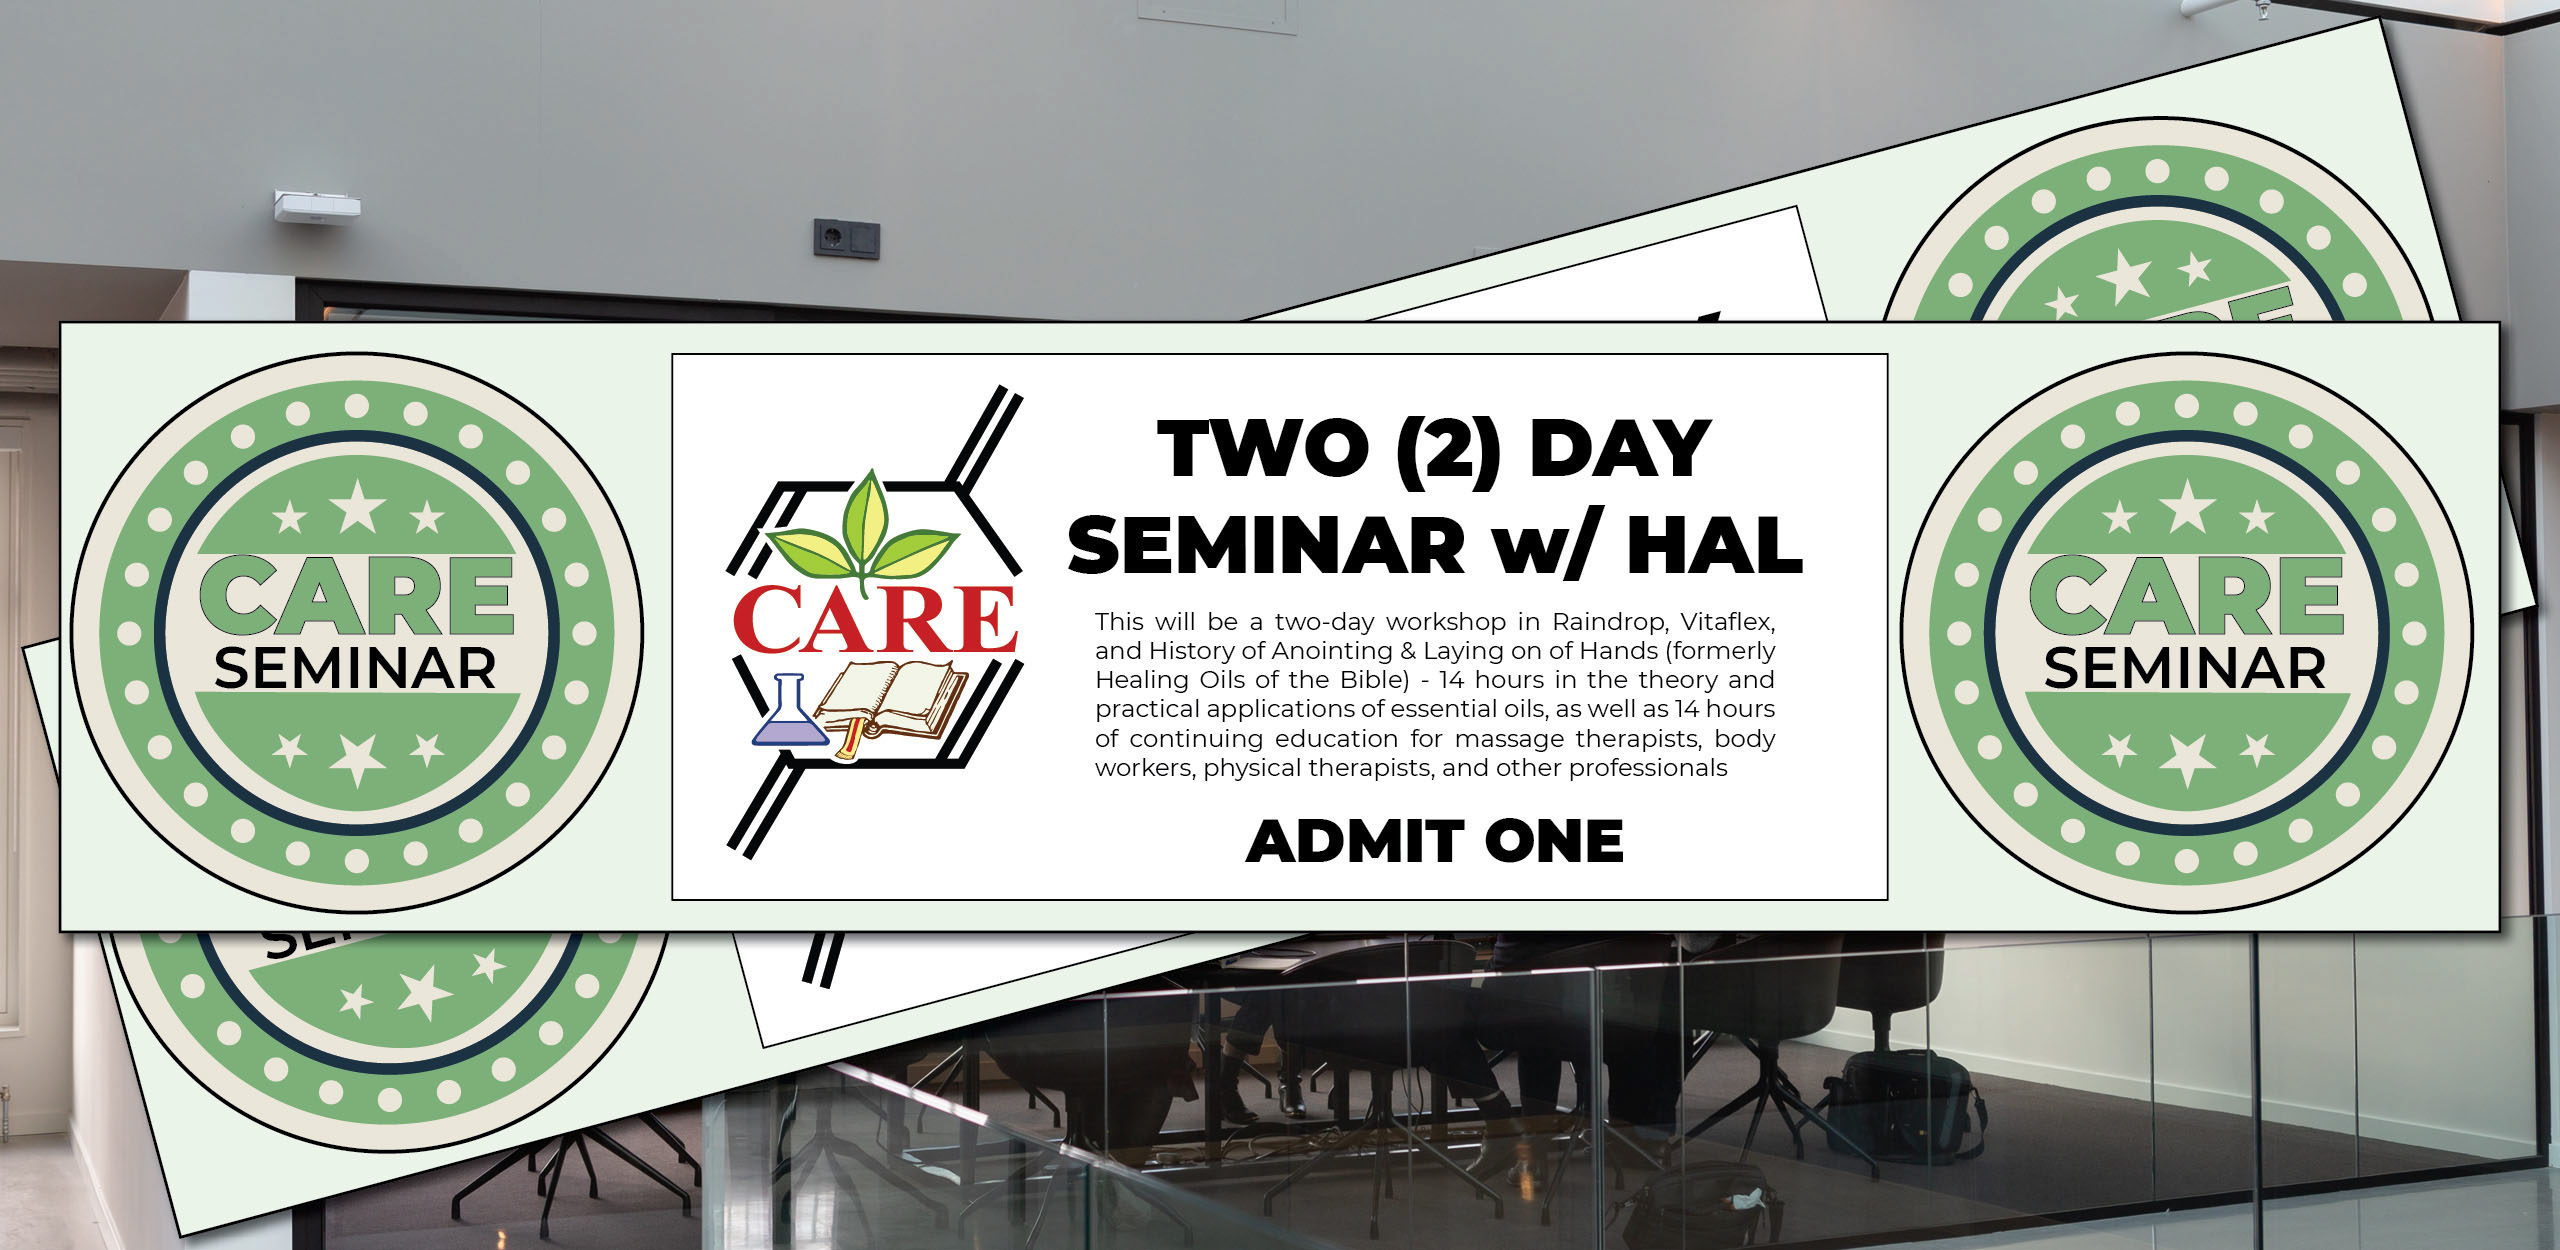 Two (2) Day Seminar with HAL